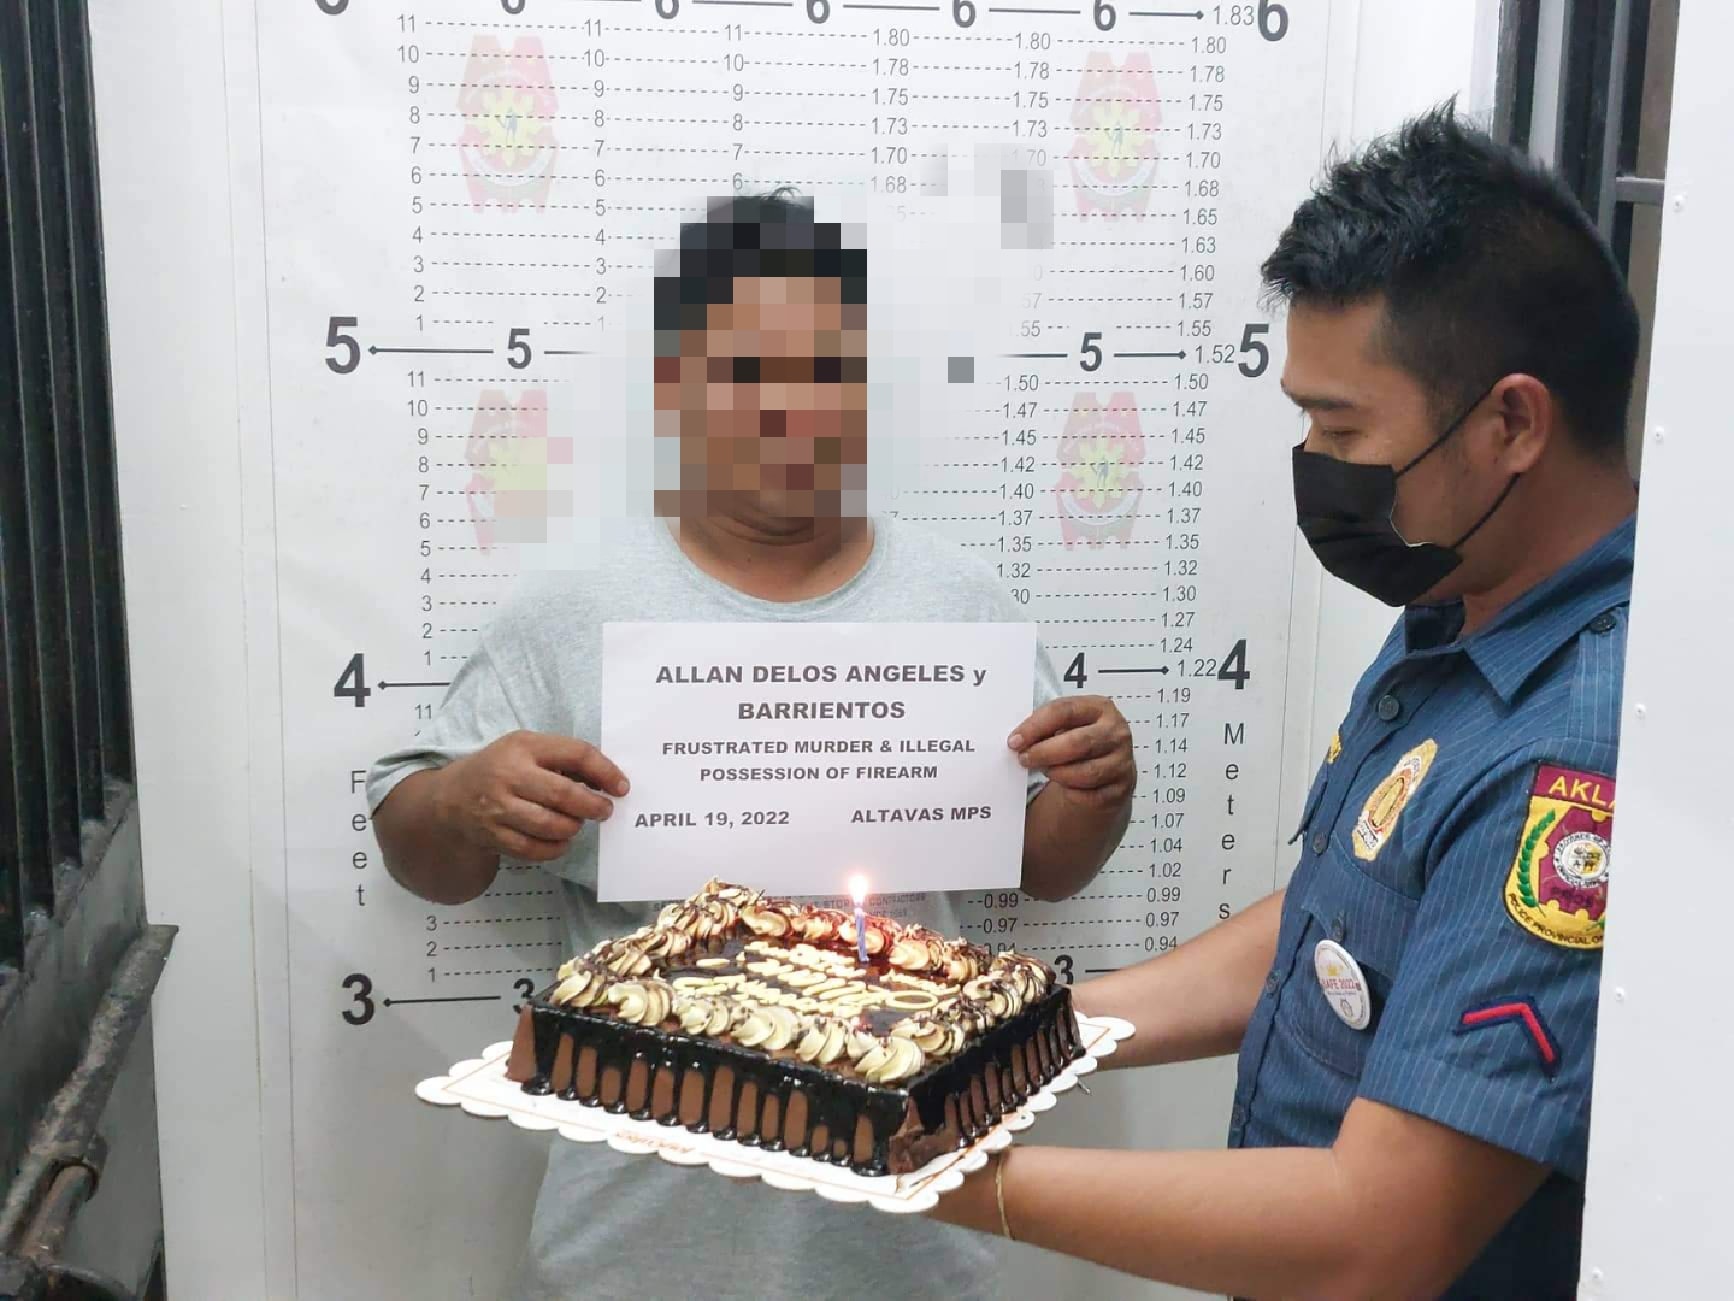 Suspect who was arrested on his birthday receives birthday cake surprise from police 02